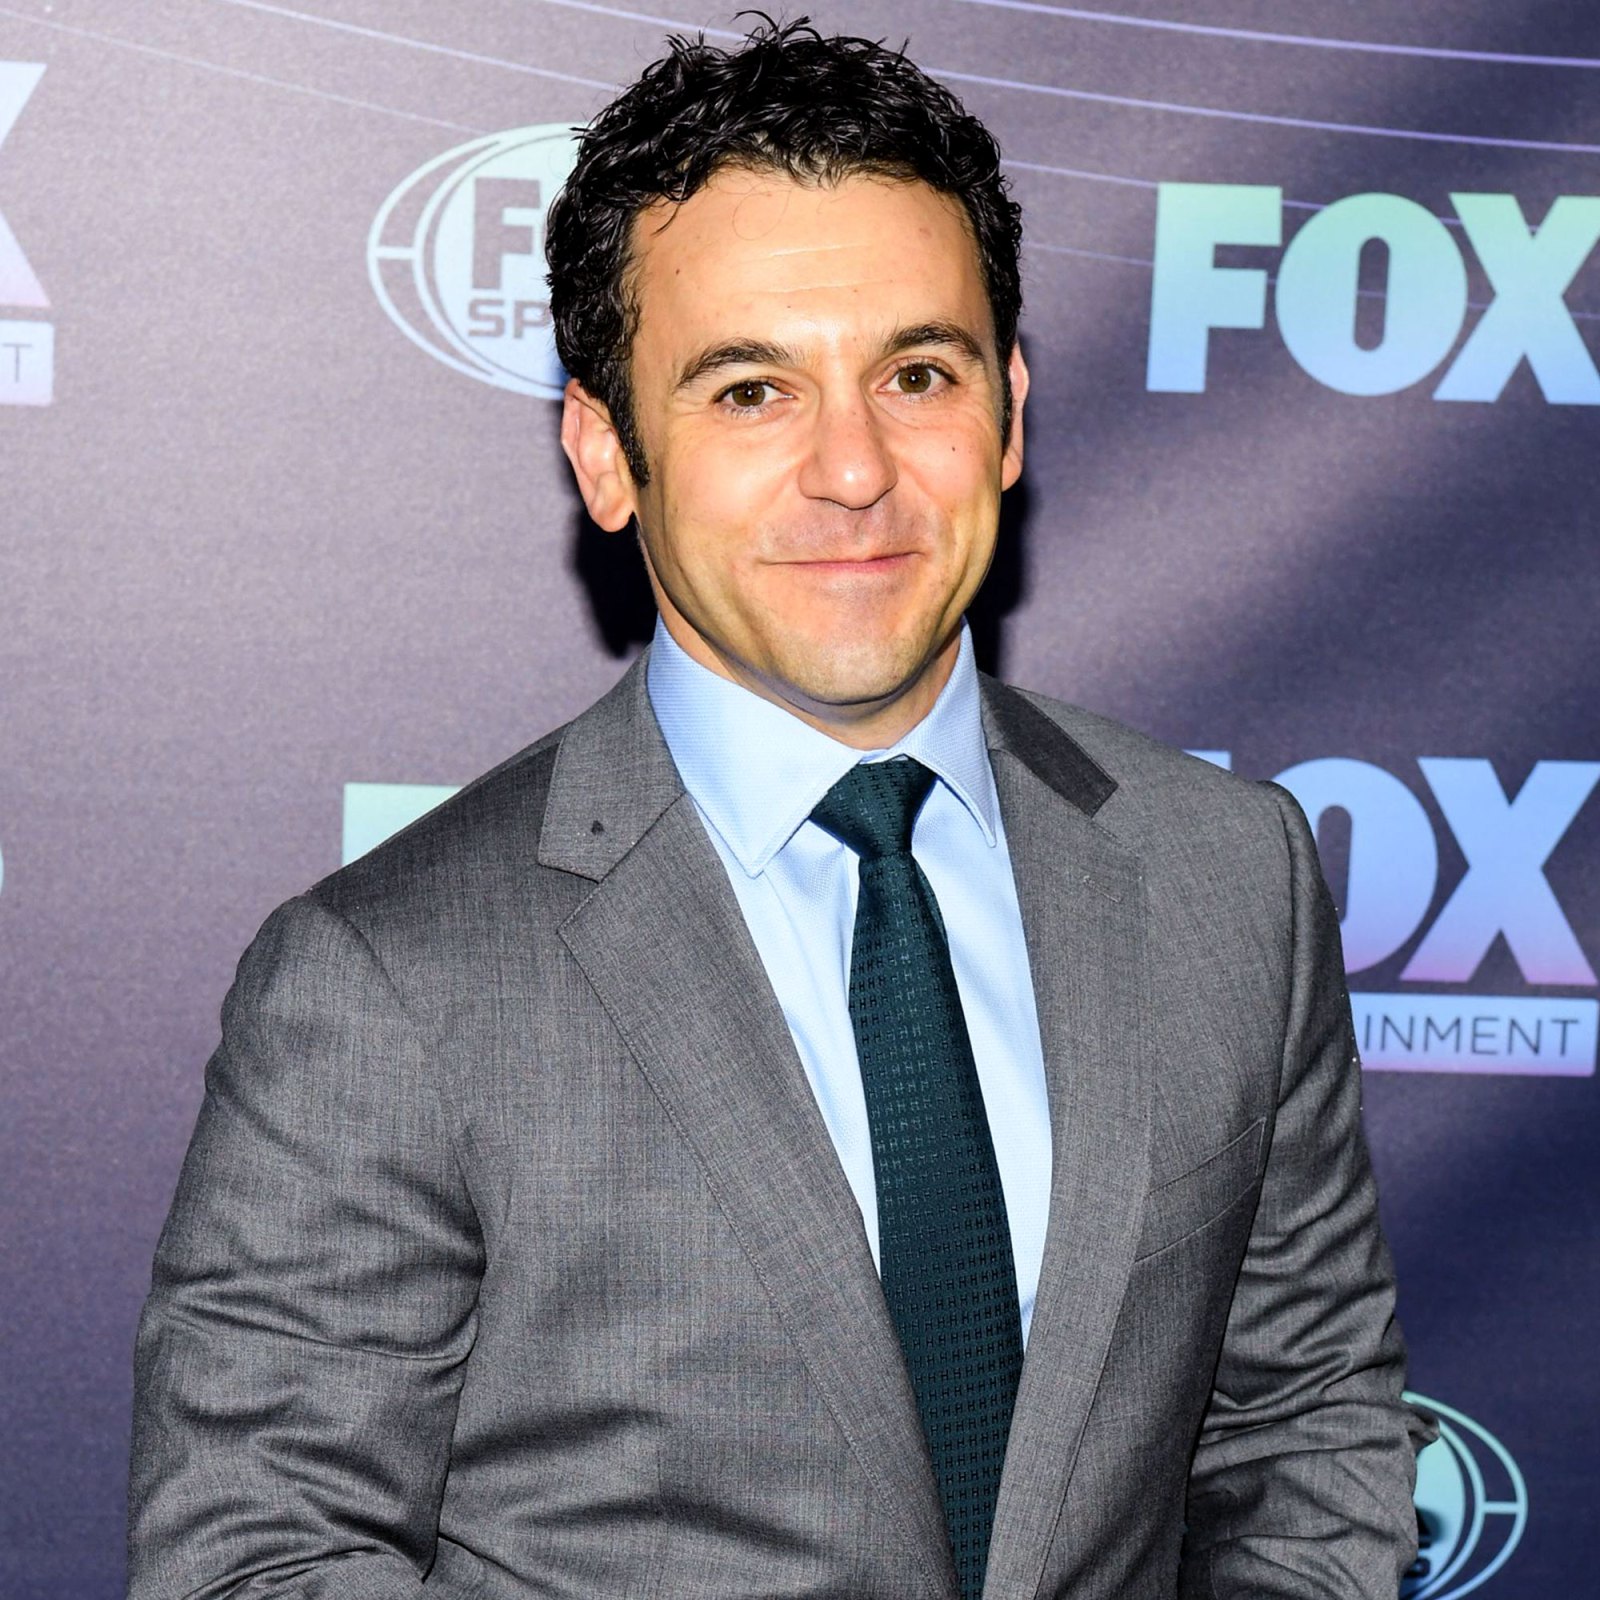 Fred Savage Accusers Detail Alleged Misconduct: 'His Eyes Would Go Dead